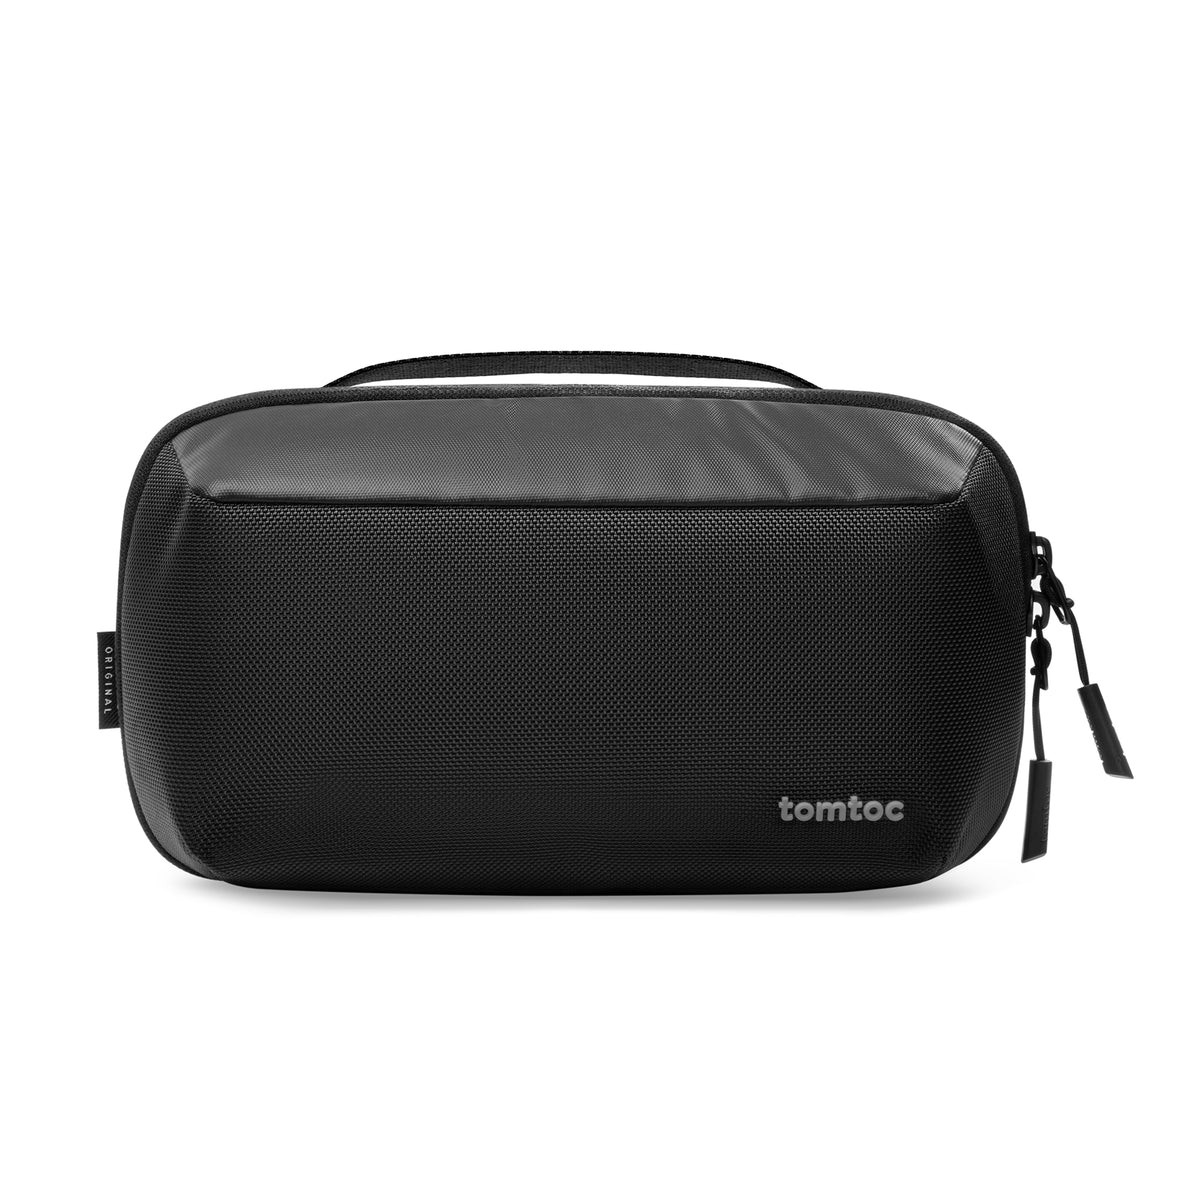 tomtoc Electronic Organizer Accessory Tech Pouch Water-resistant Storage Bag - Black